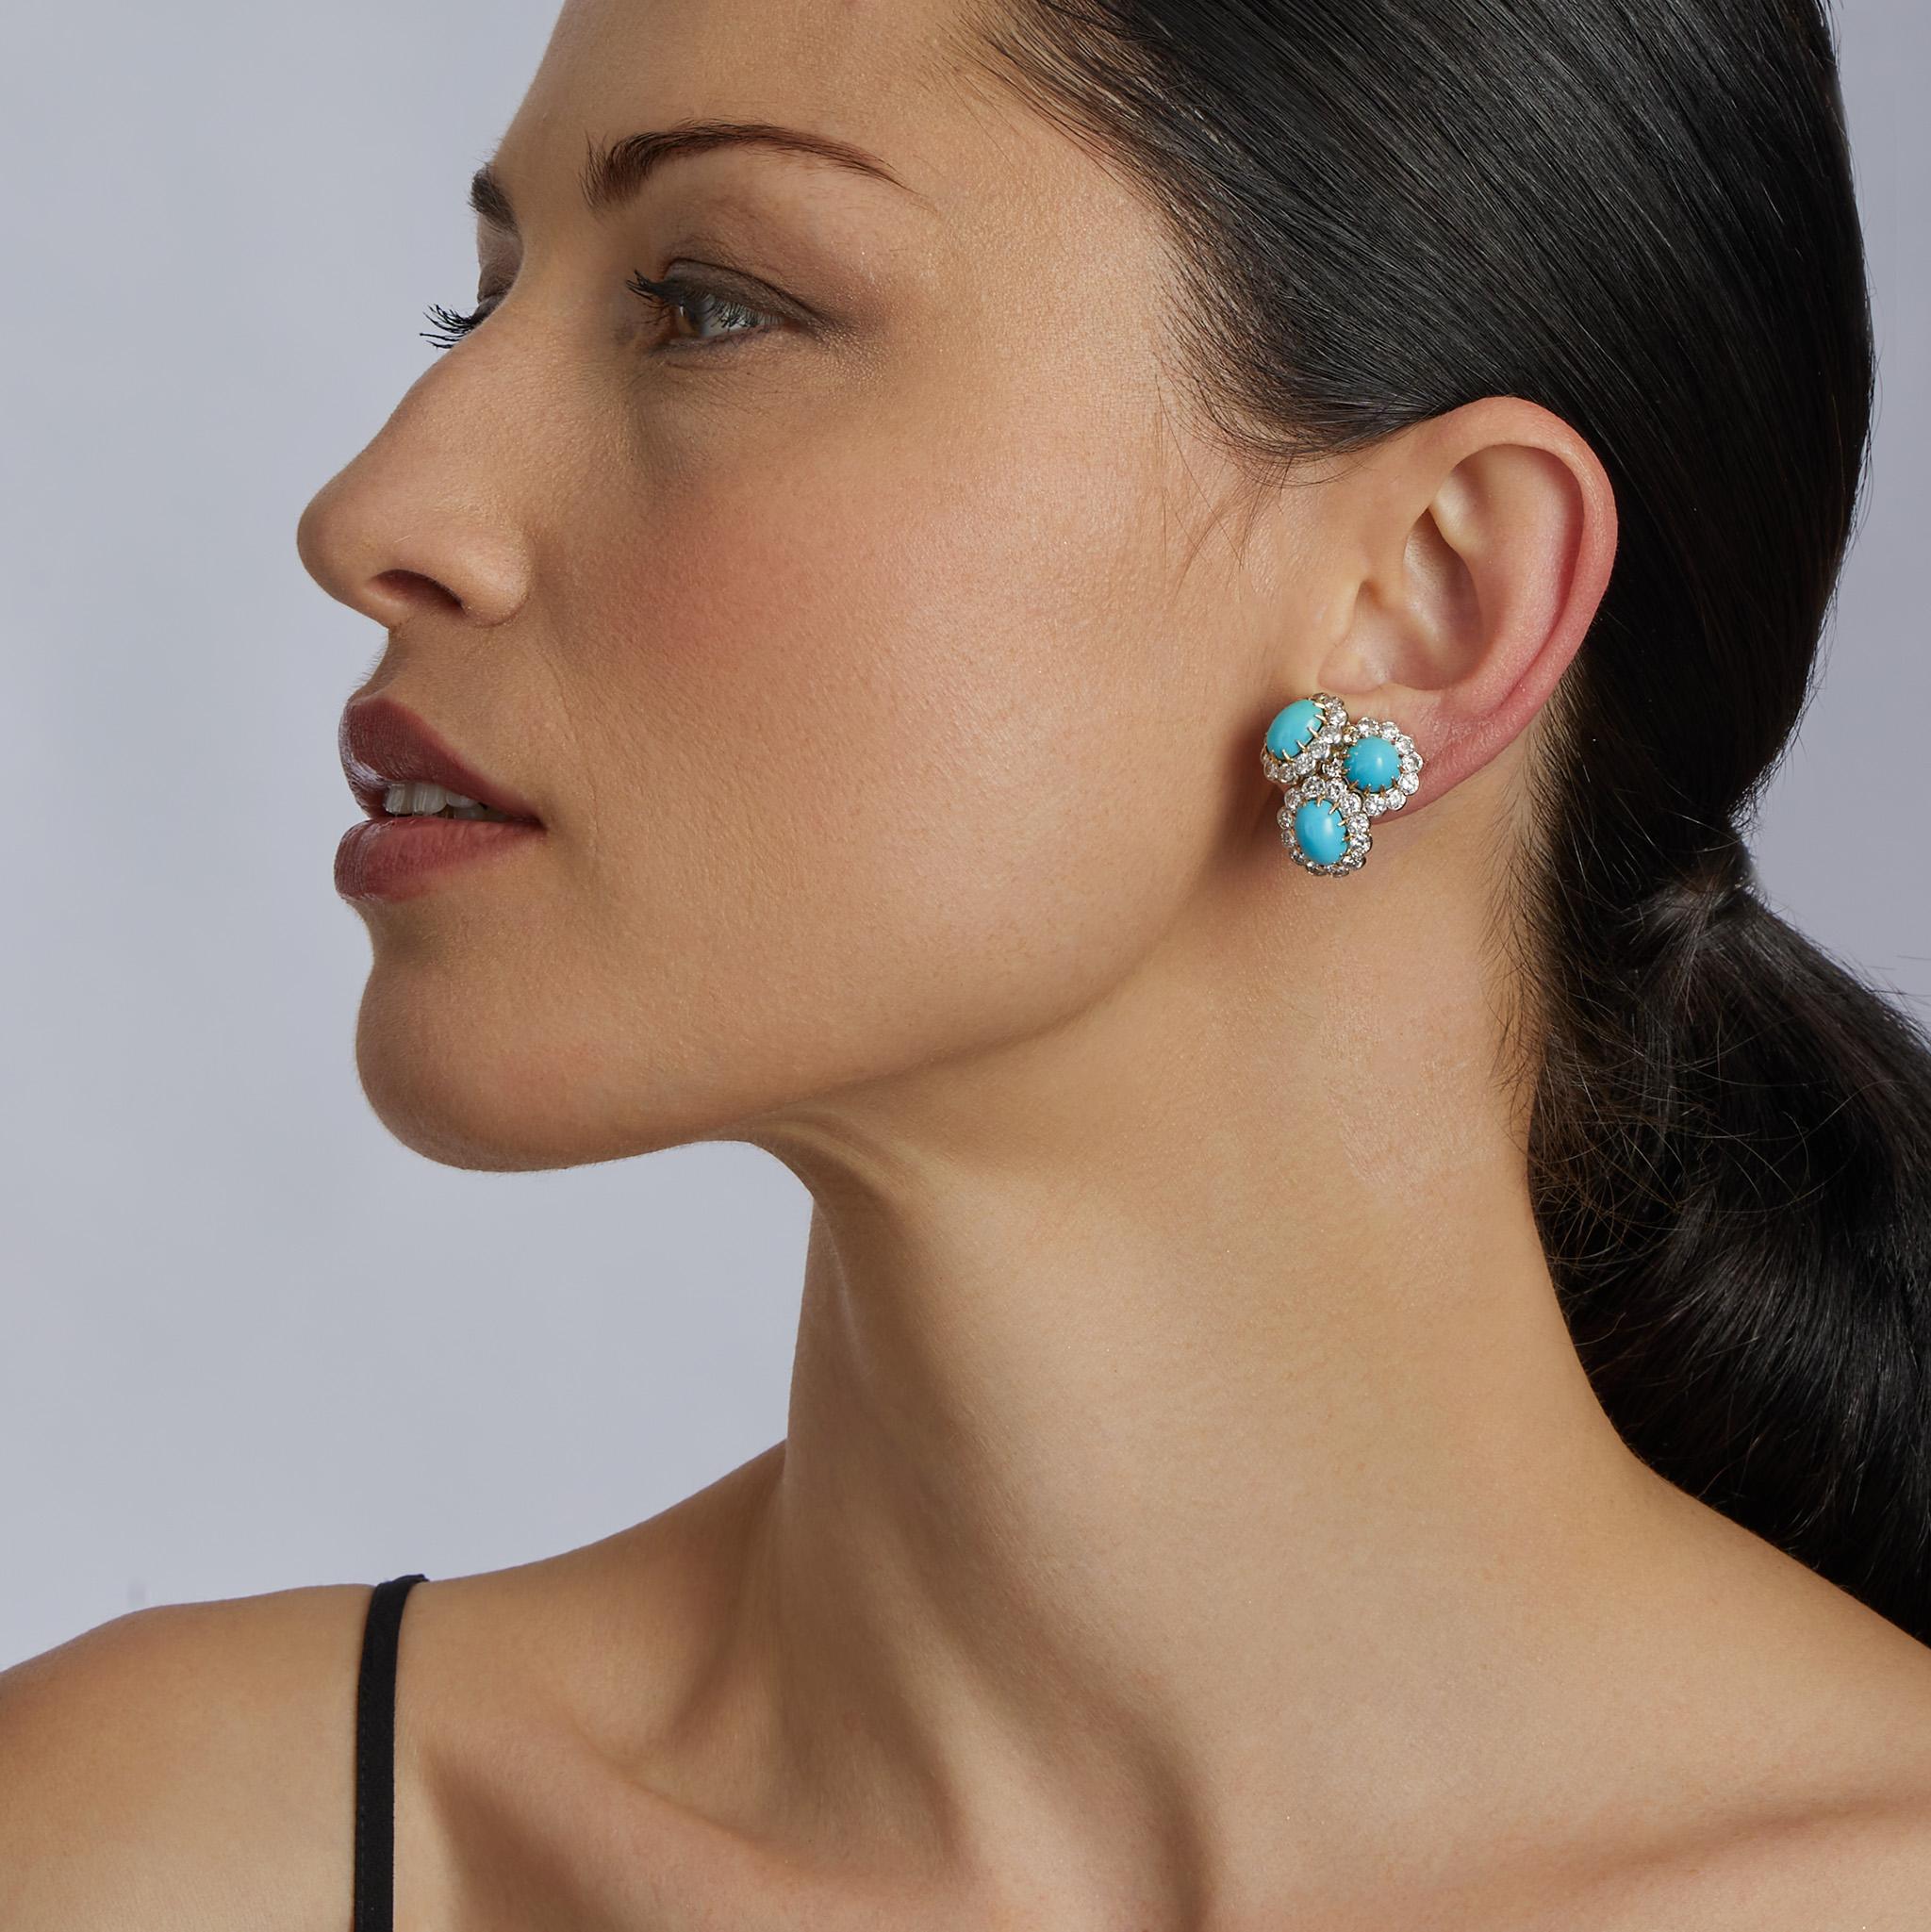 Dating from the 1970s, these Van Cleef & Arpels Paris clip earrings are composed of turquoise and diamonds set in 18K gold and platinum. The clip earrings are composed of a layered, bombé cluster of three cabochon turquoise, each framed by round